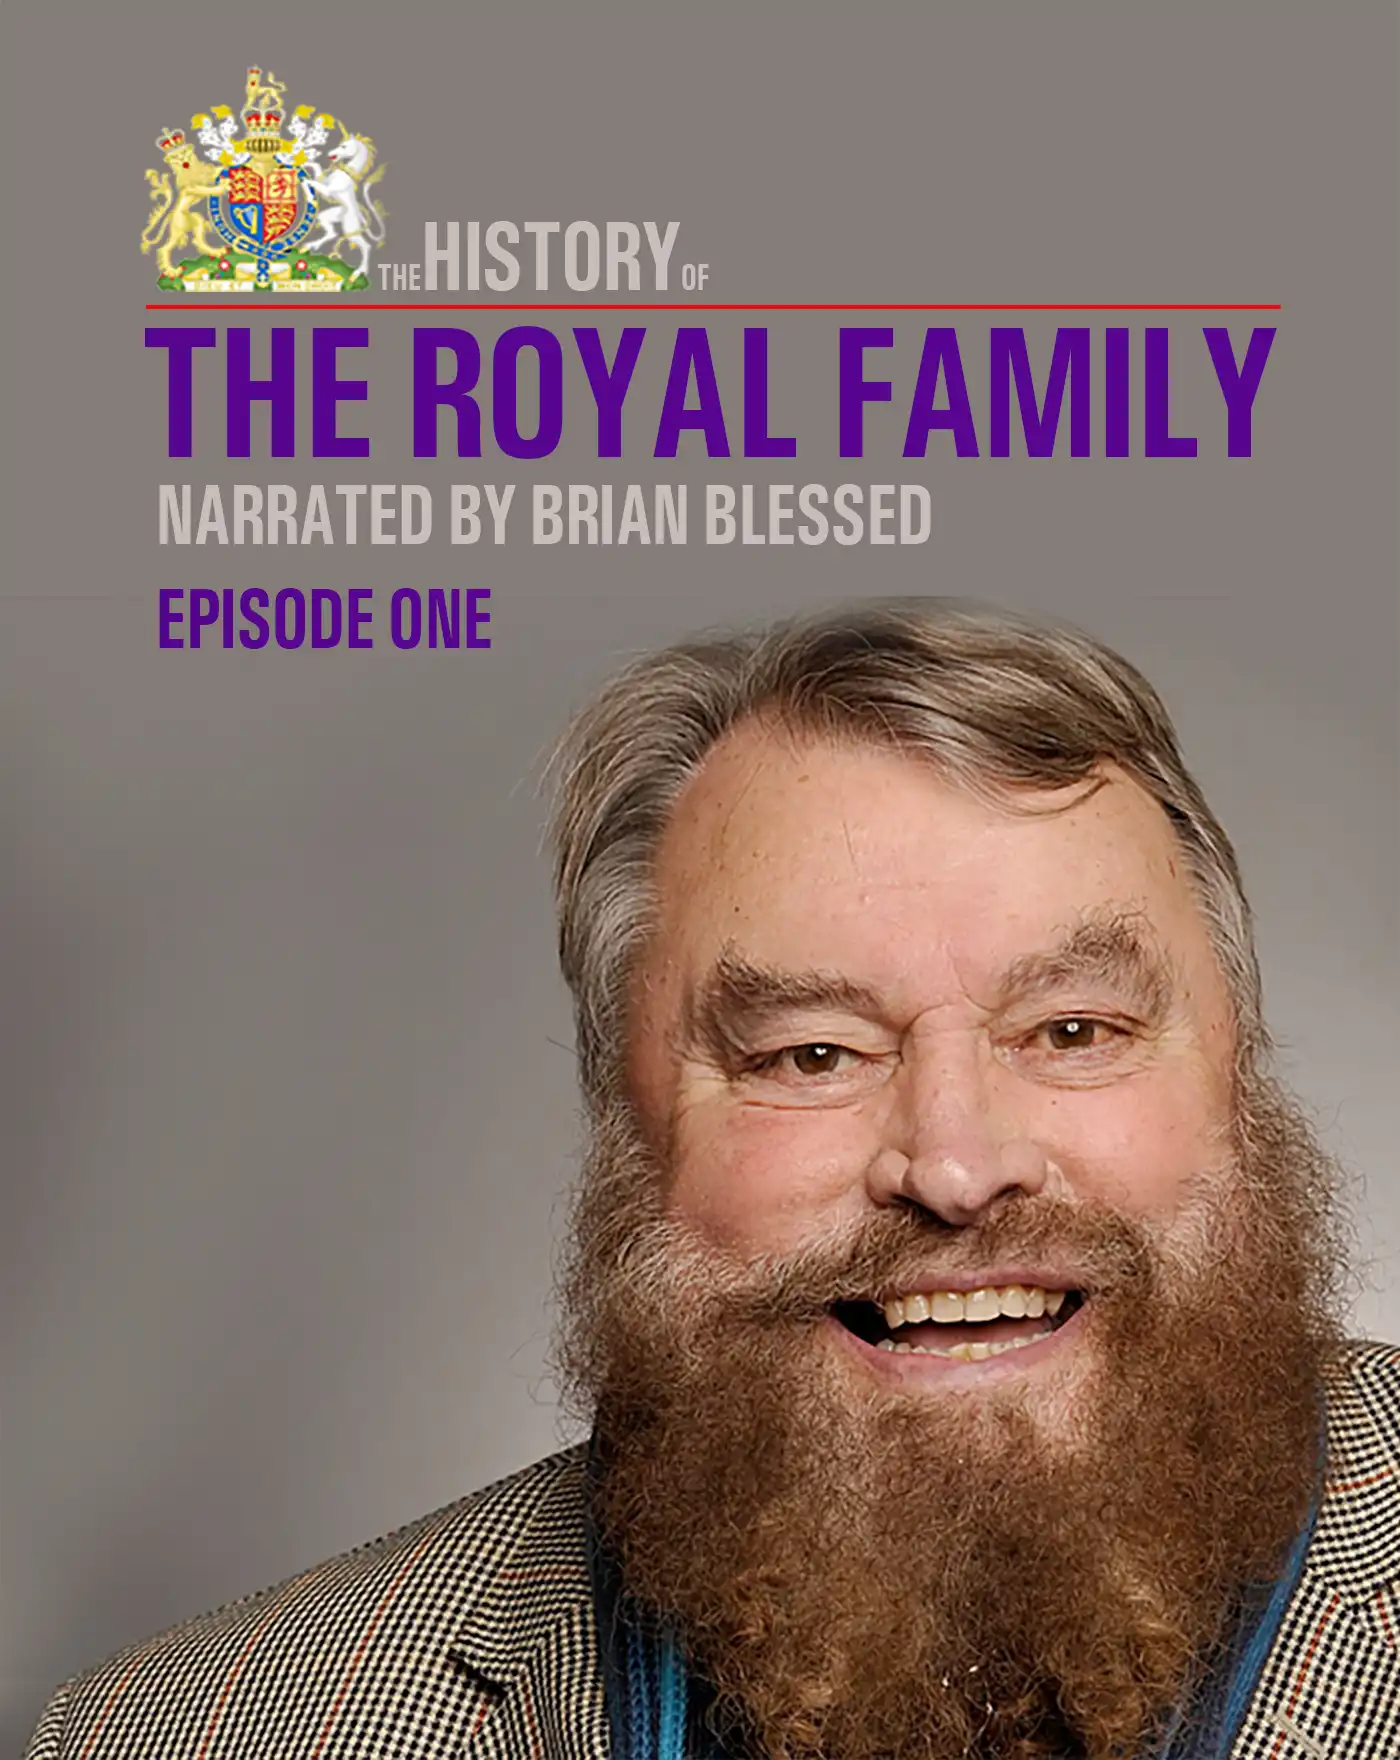 The History of The Royal Family Episode One